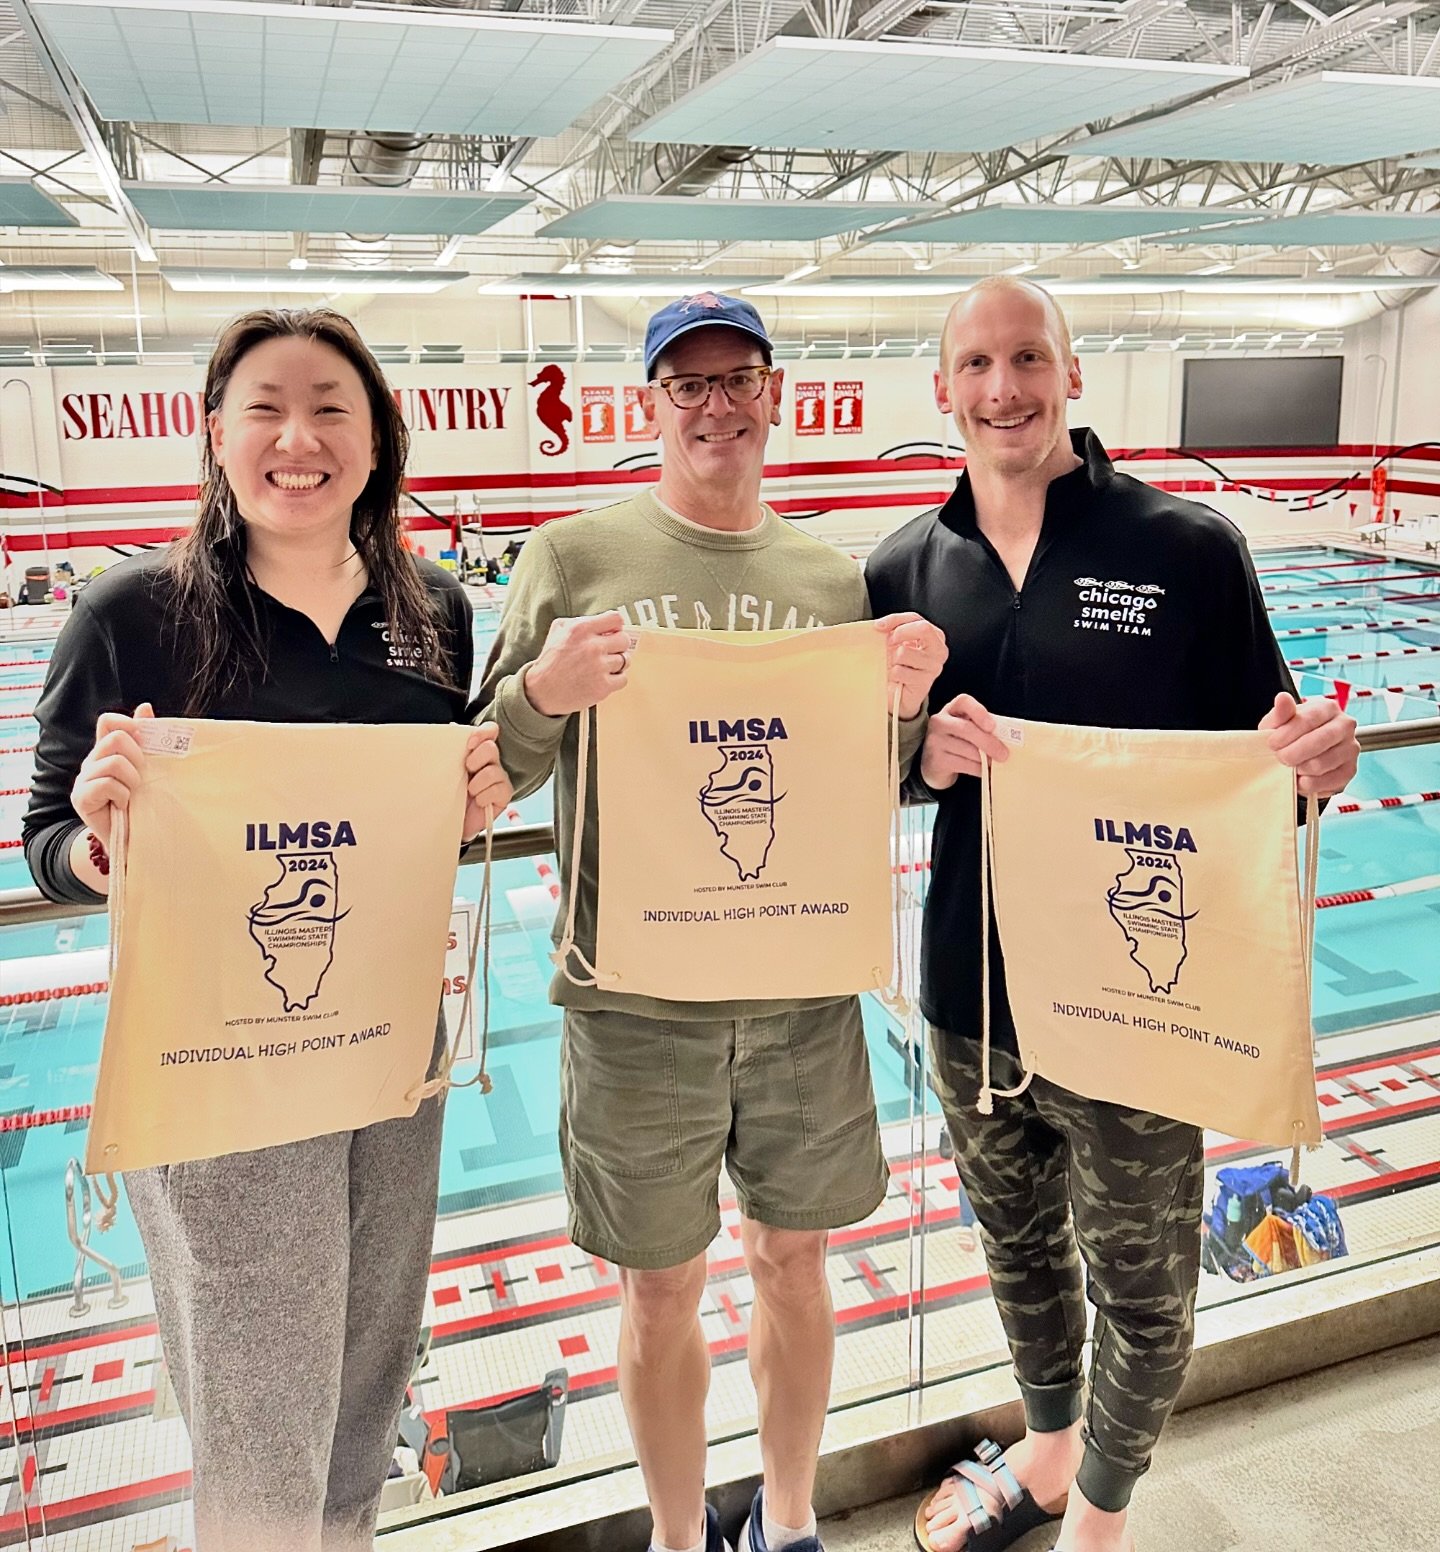 Congratulations to our Smelts who were the top point earners for their age group at this year&rsquo;s IL Masters Swim Meet!

#lgbtq🌈 #swimming🏊 #swimlife #gaysports #lgbtqathlete #queerathlete #gayboy #gaypride #transchicago #mastersswimming #trans